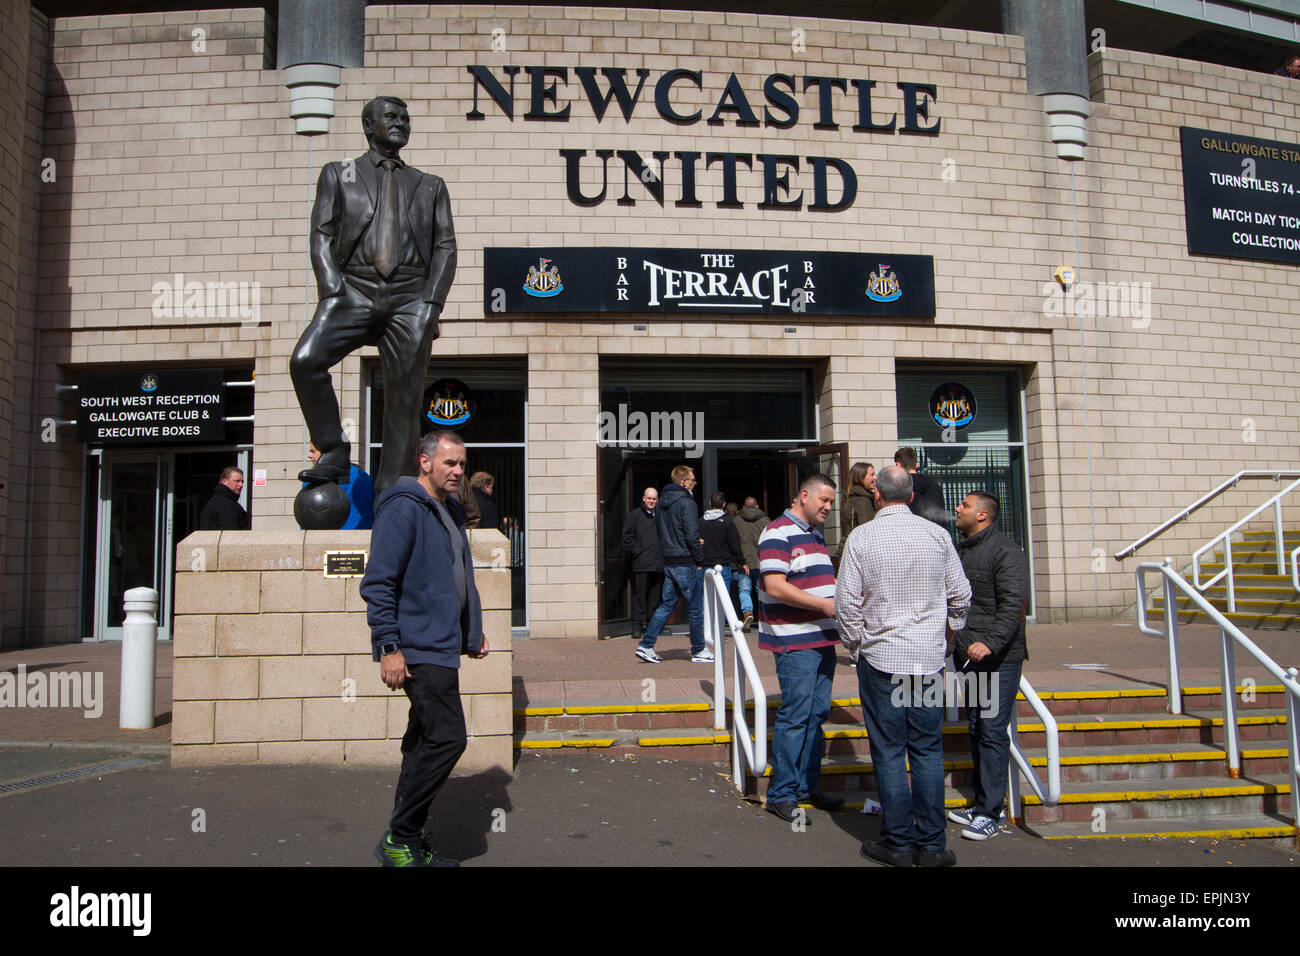 Supporters gathering underneath a statue to former manager Sir Bobby Robson, situated outside the Milburn Stand of the stadium before Newcastle United host Tottenham Hotspurs in an English Premier League match at St. James' Park. The match was boycotted by a section of the home support critical of the role of owner Mike Ashley and sponsorship by a payday loan company. The match was won by Spurs by 3-1, watched by 47,427, the lowest league gate of the season at the stadium. Stock Photo